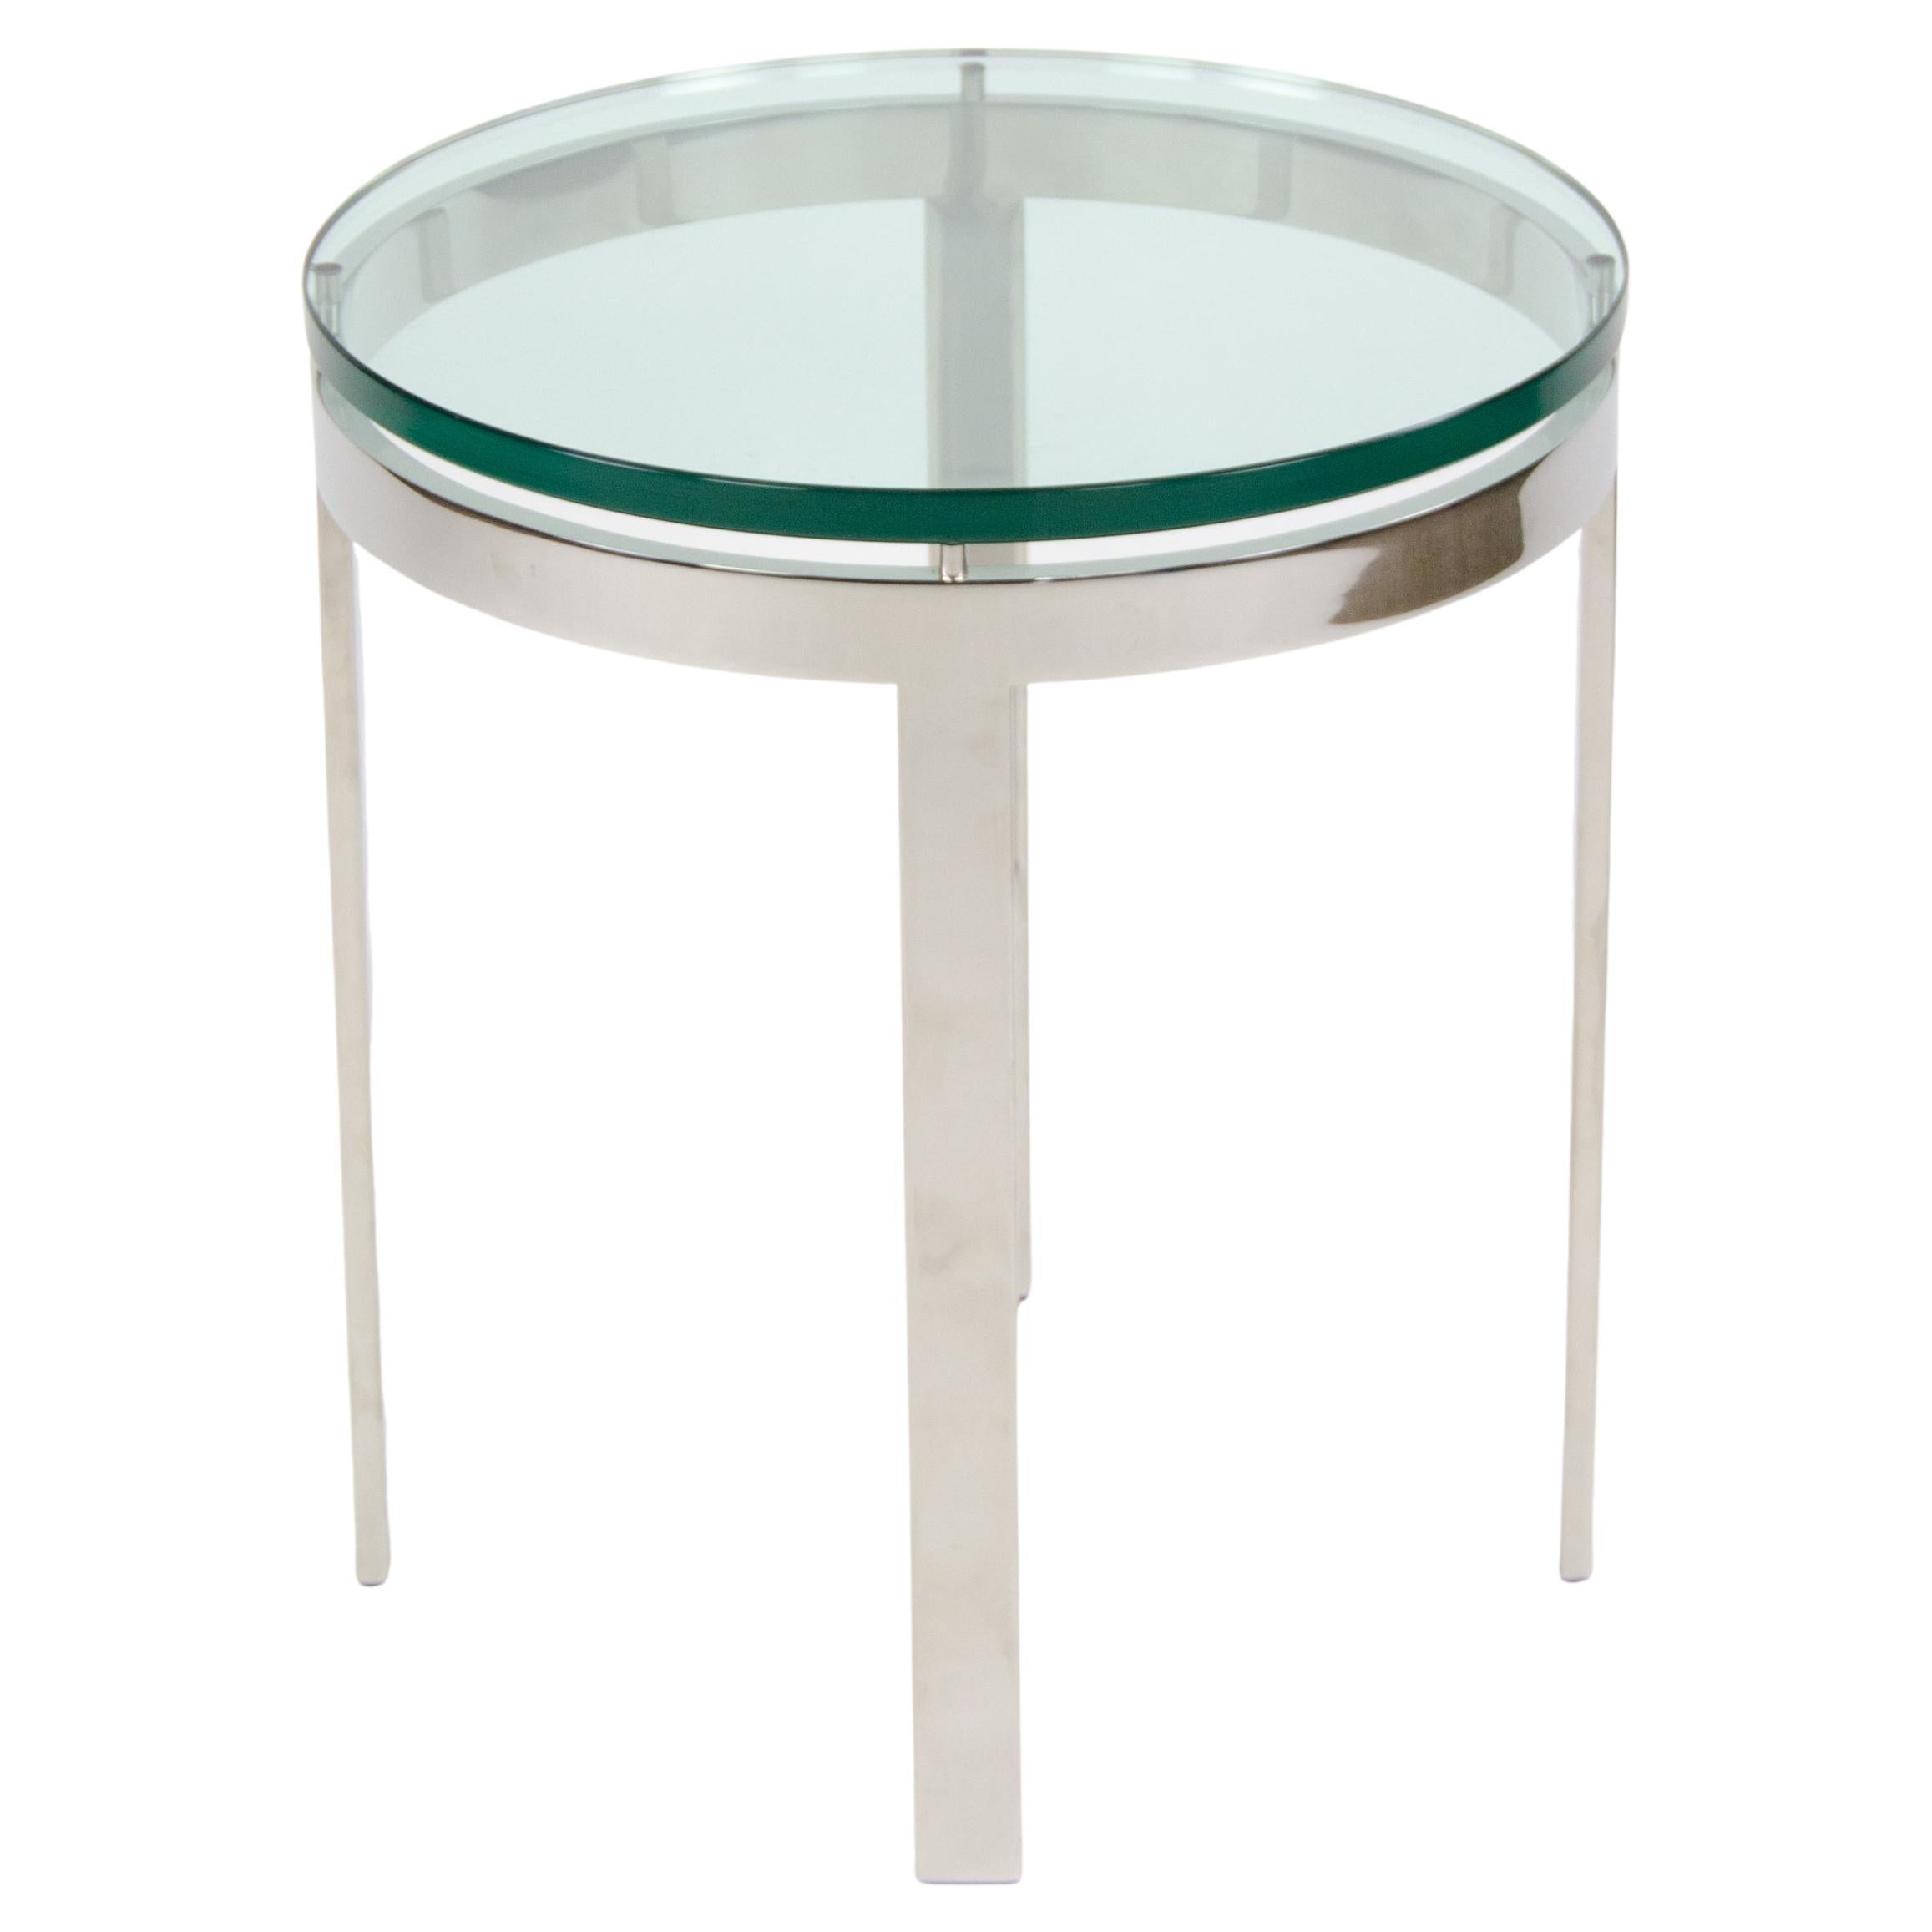 Nicos Zographos Designs Limited Glass Stainless Side Table from SOM Project